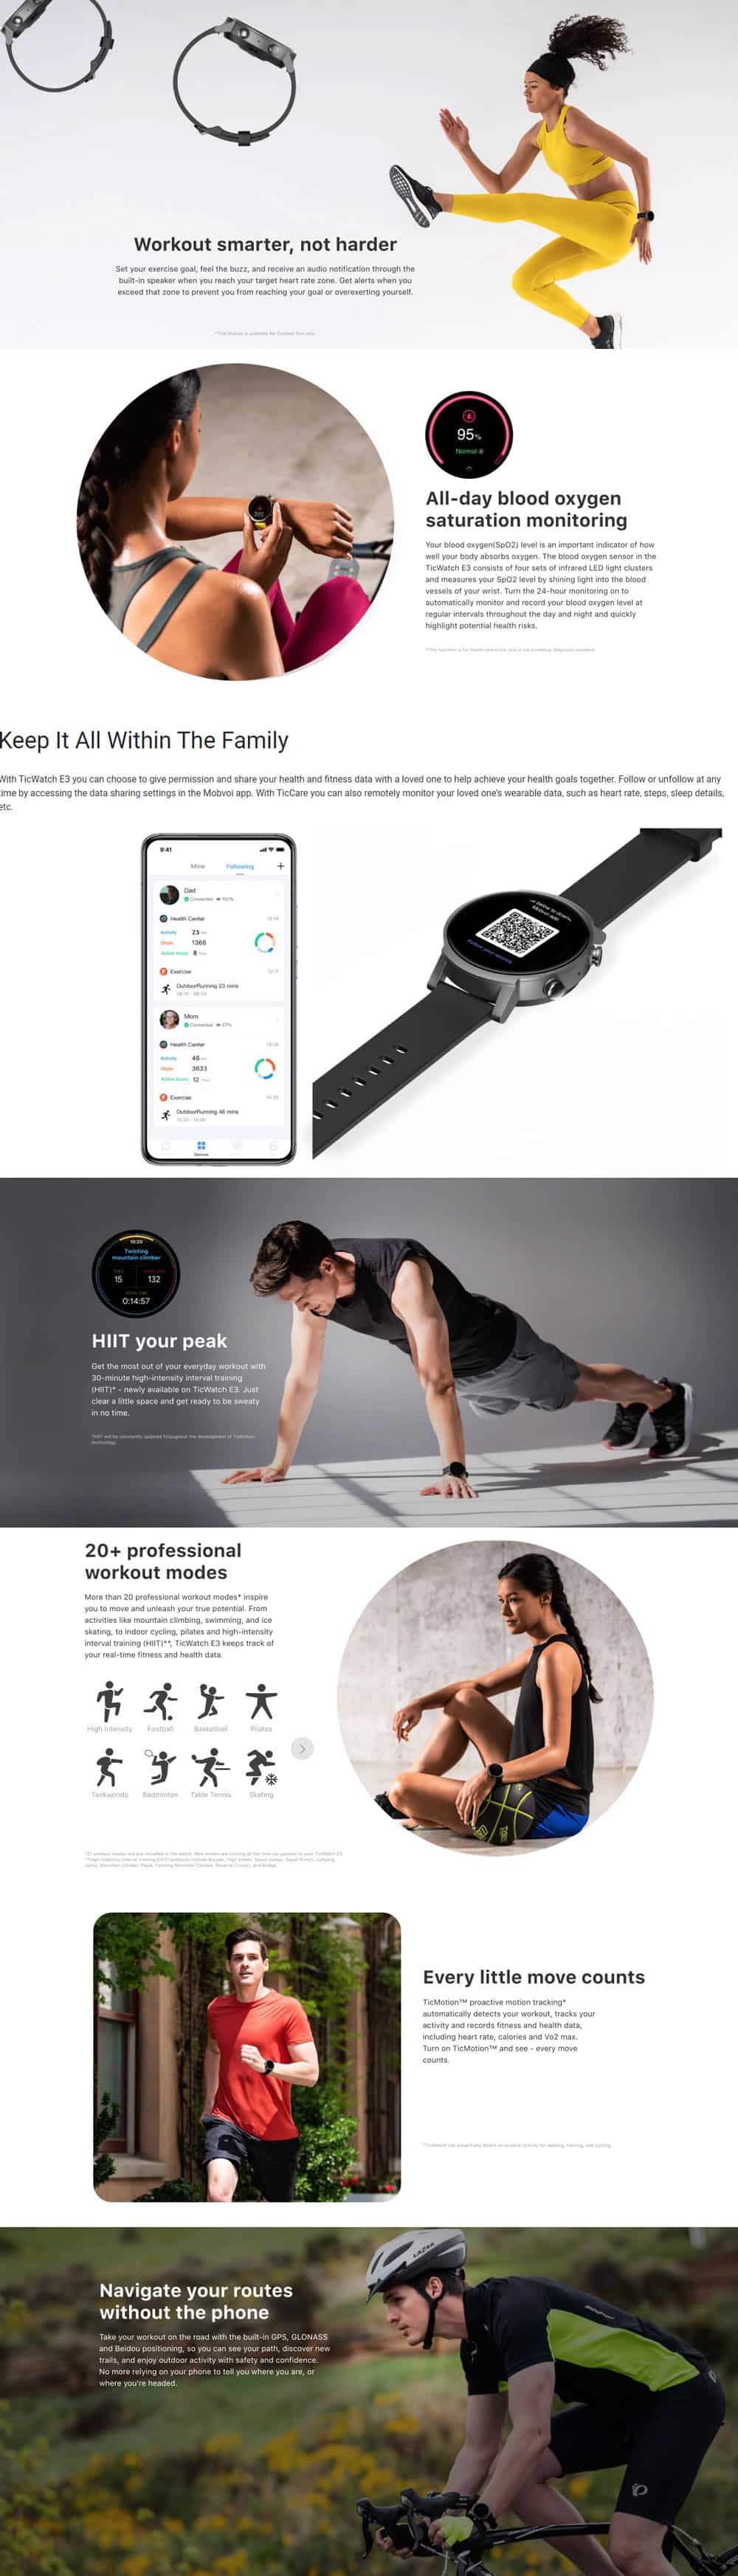 TicWatch E3 Android Wear OS Smart Watch 7